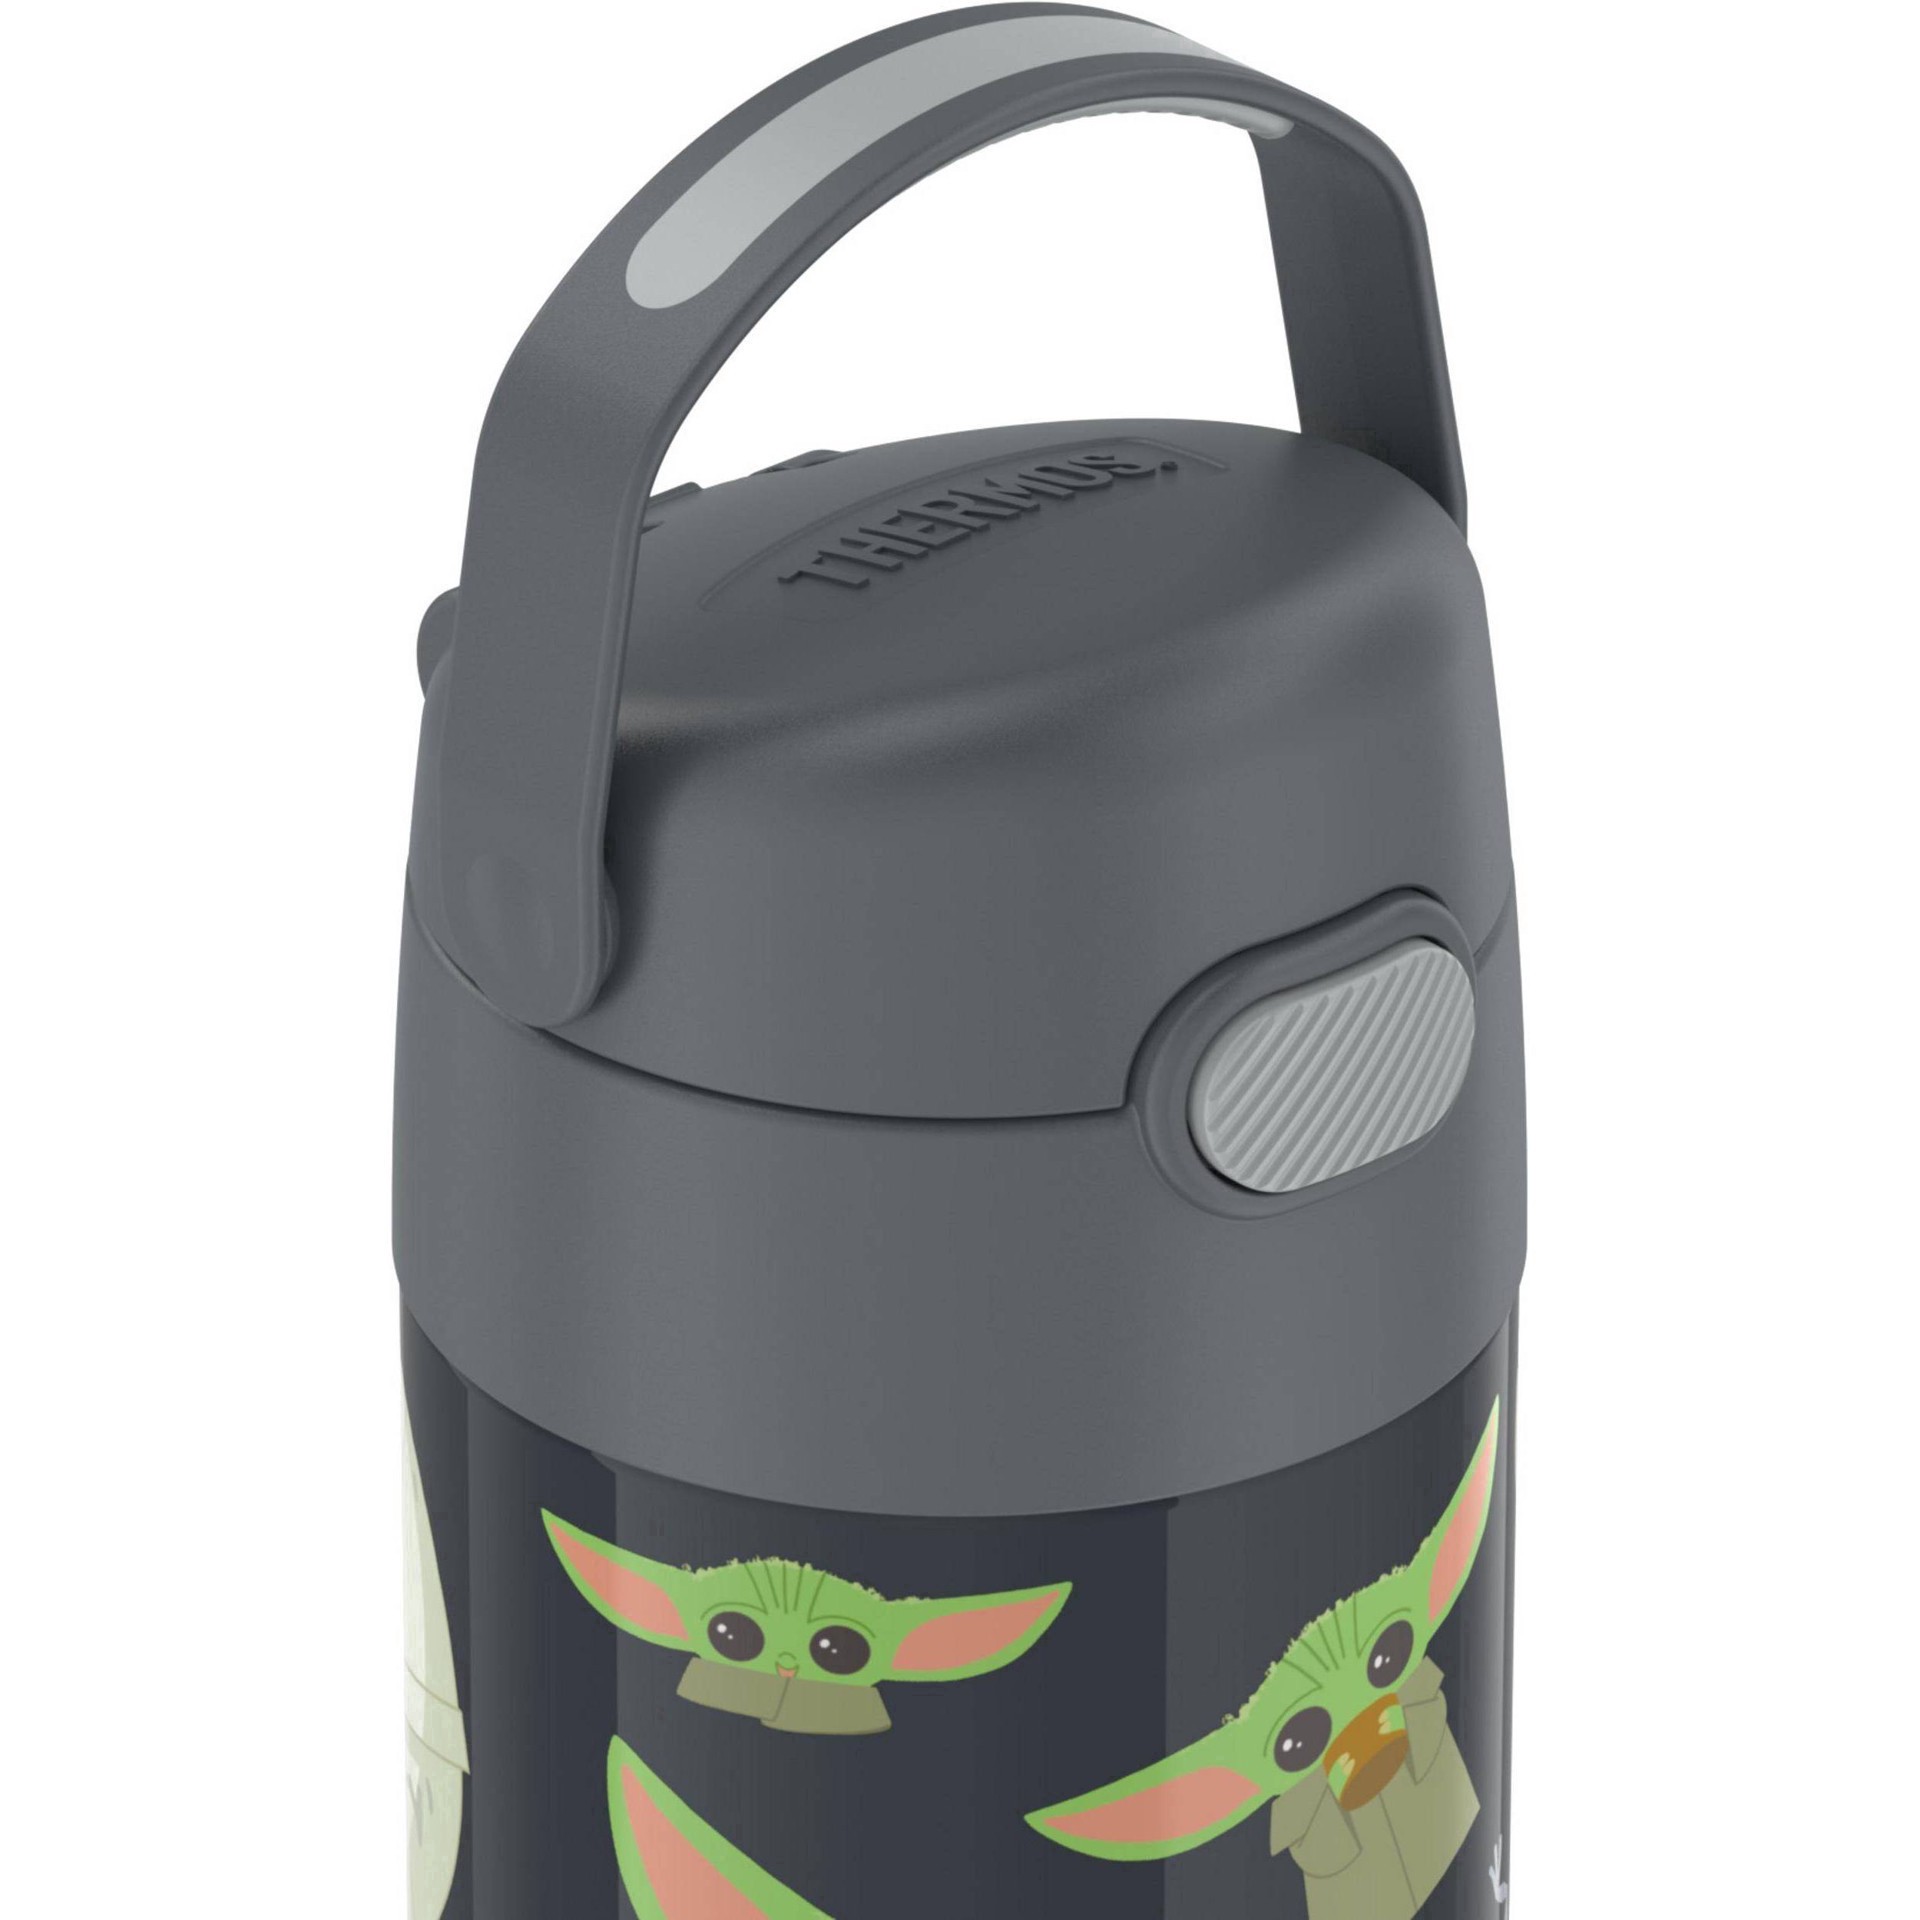 Thermos Baby Yoda Funtainer Bottle 12 oz